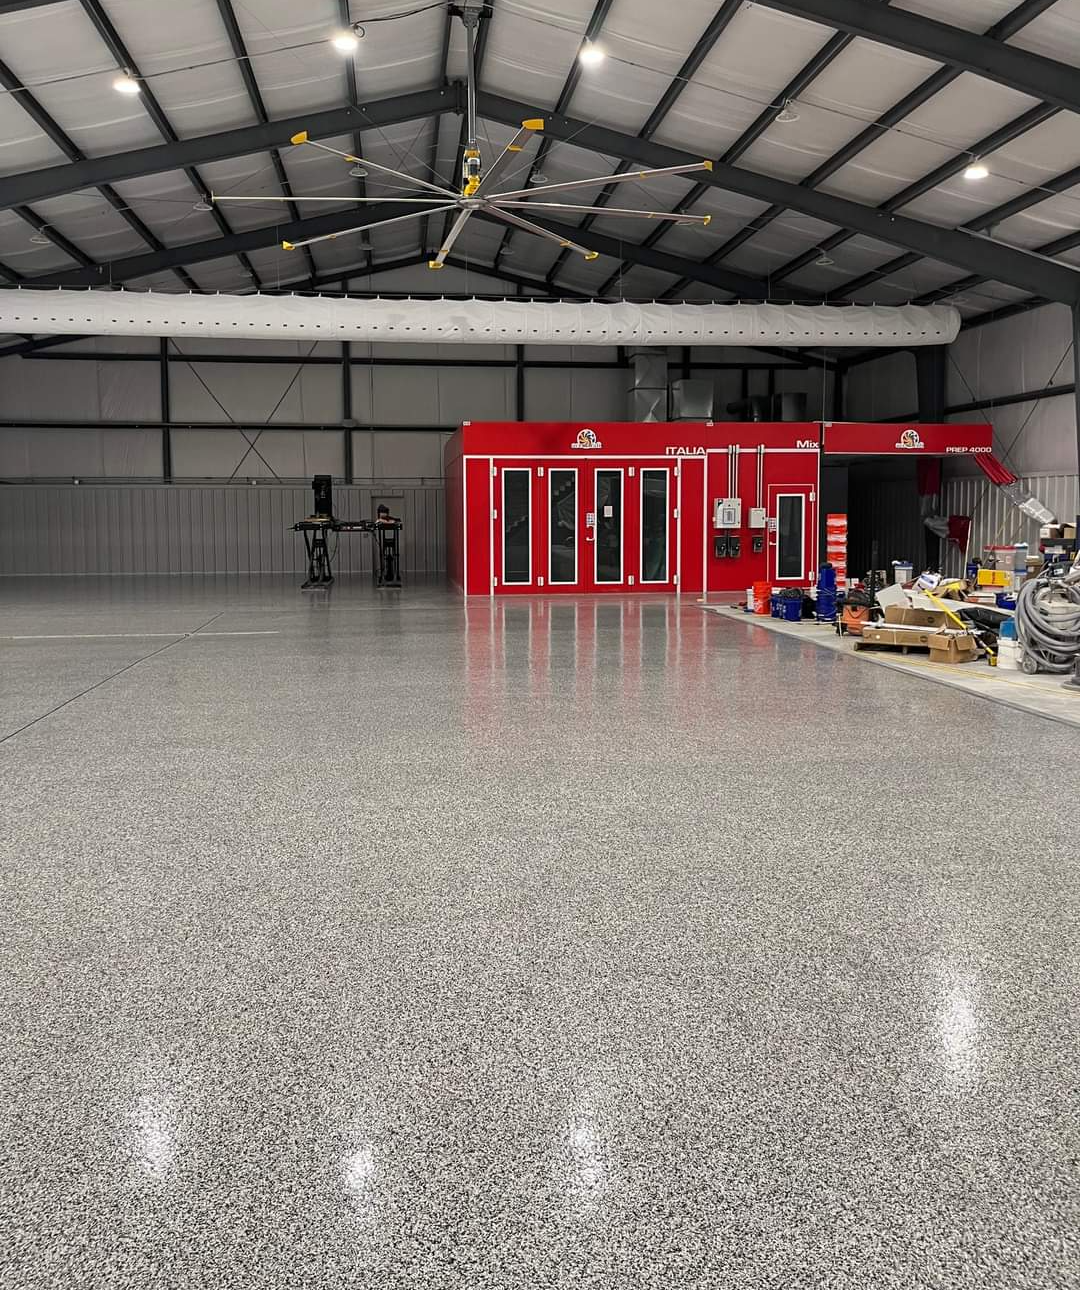 This large garage looks great with epoxy flooring.